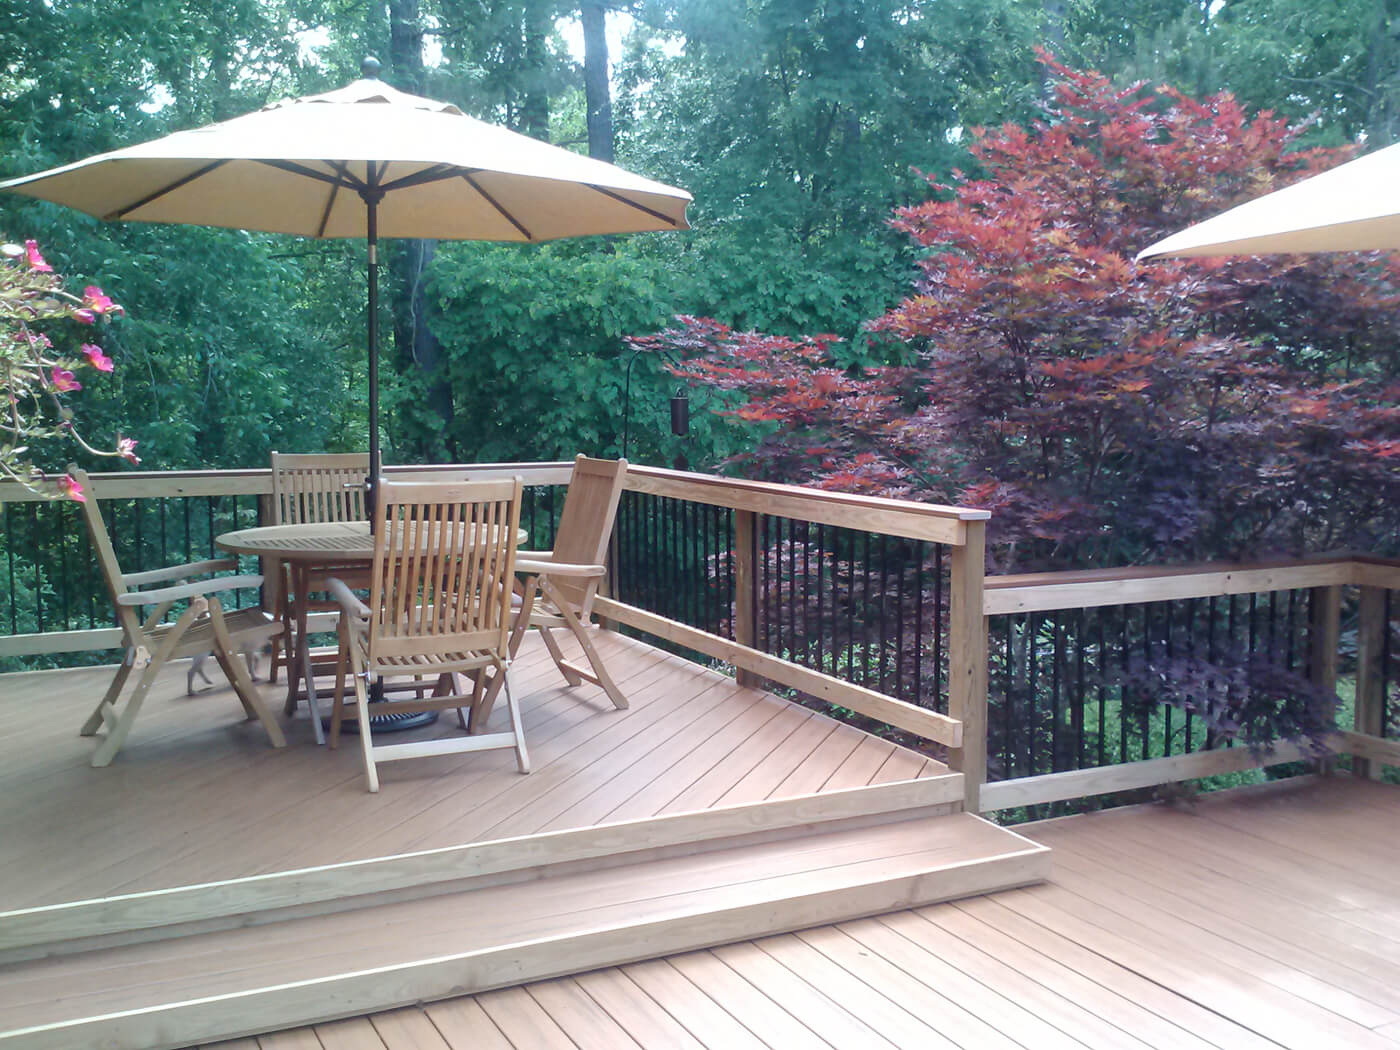 Custom wood deck with wood seating area